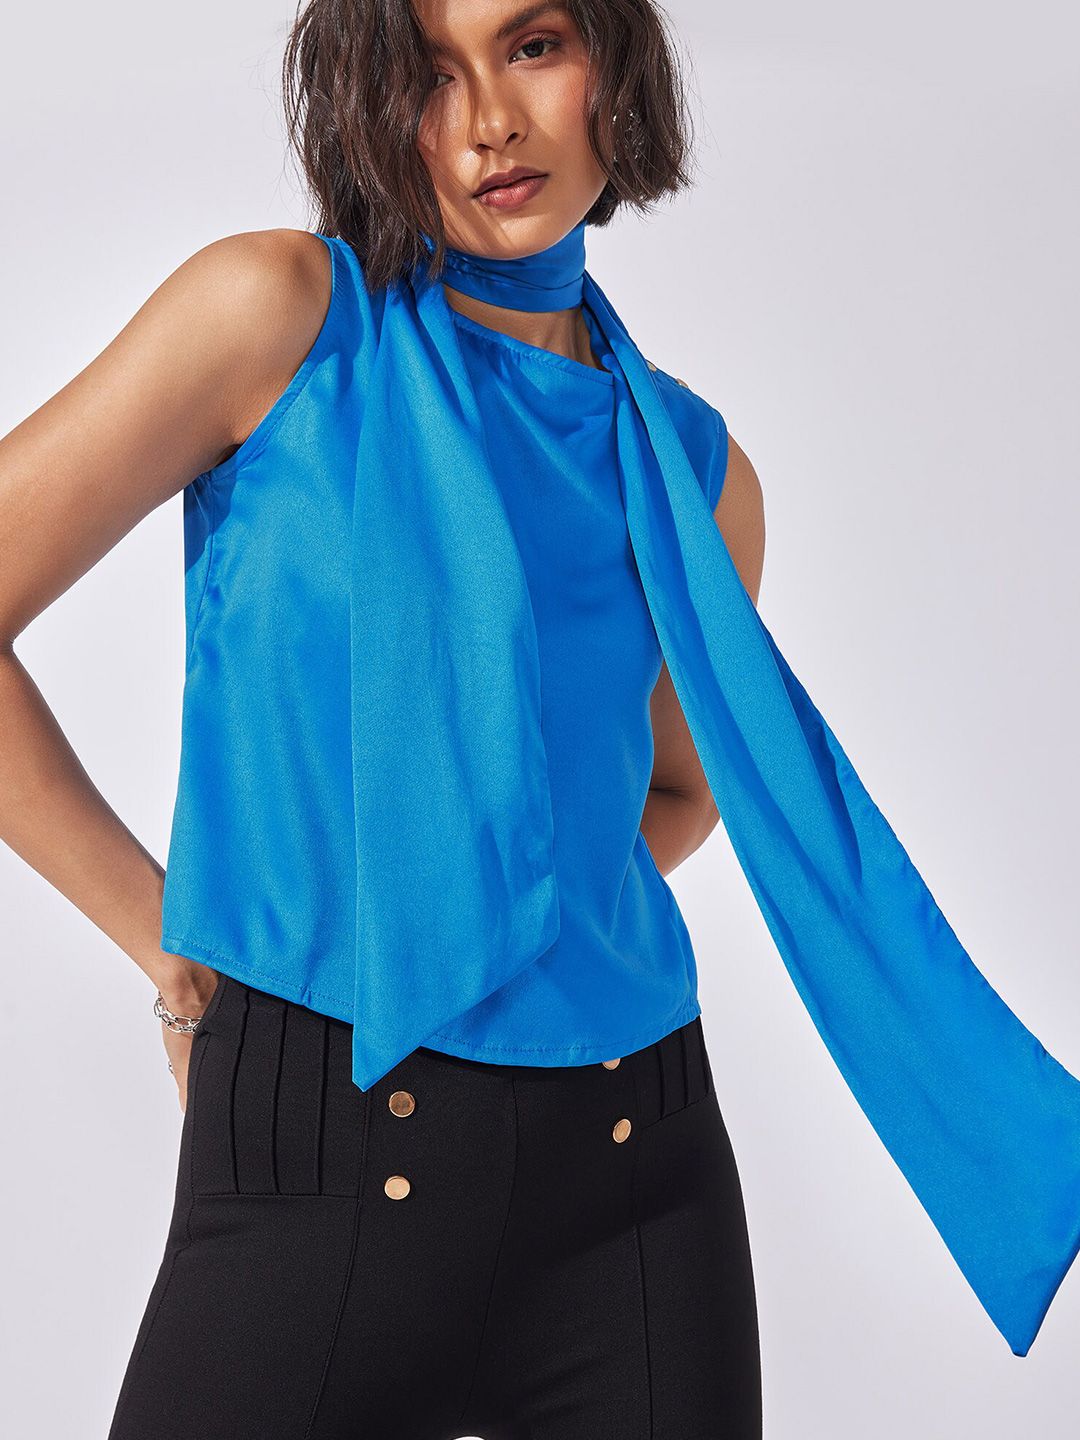 The Label Life Blue Tie-Up Neck Satin Top Price in India